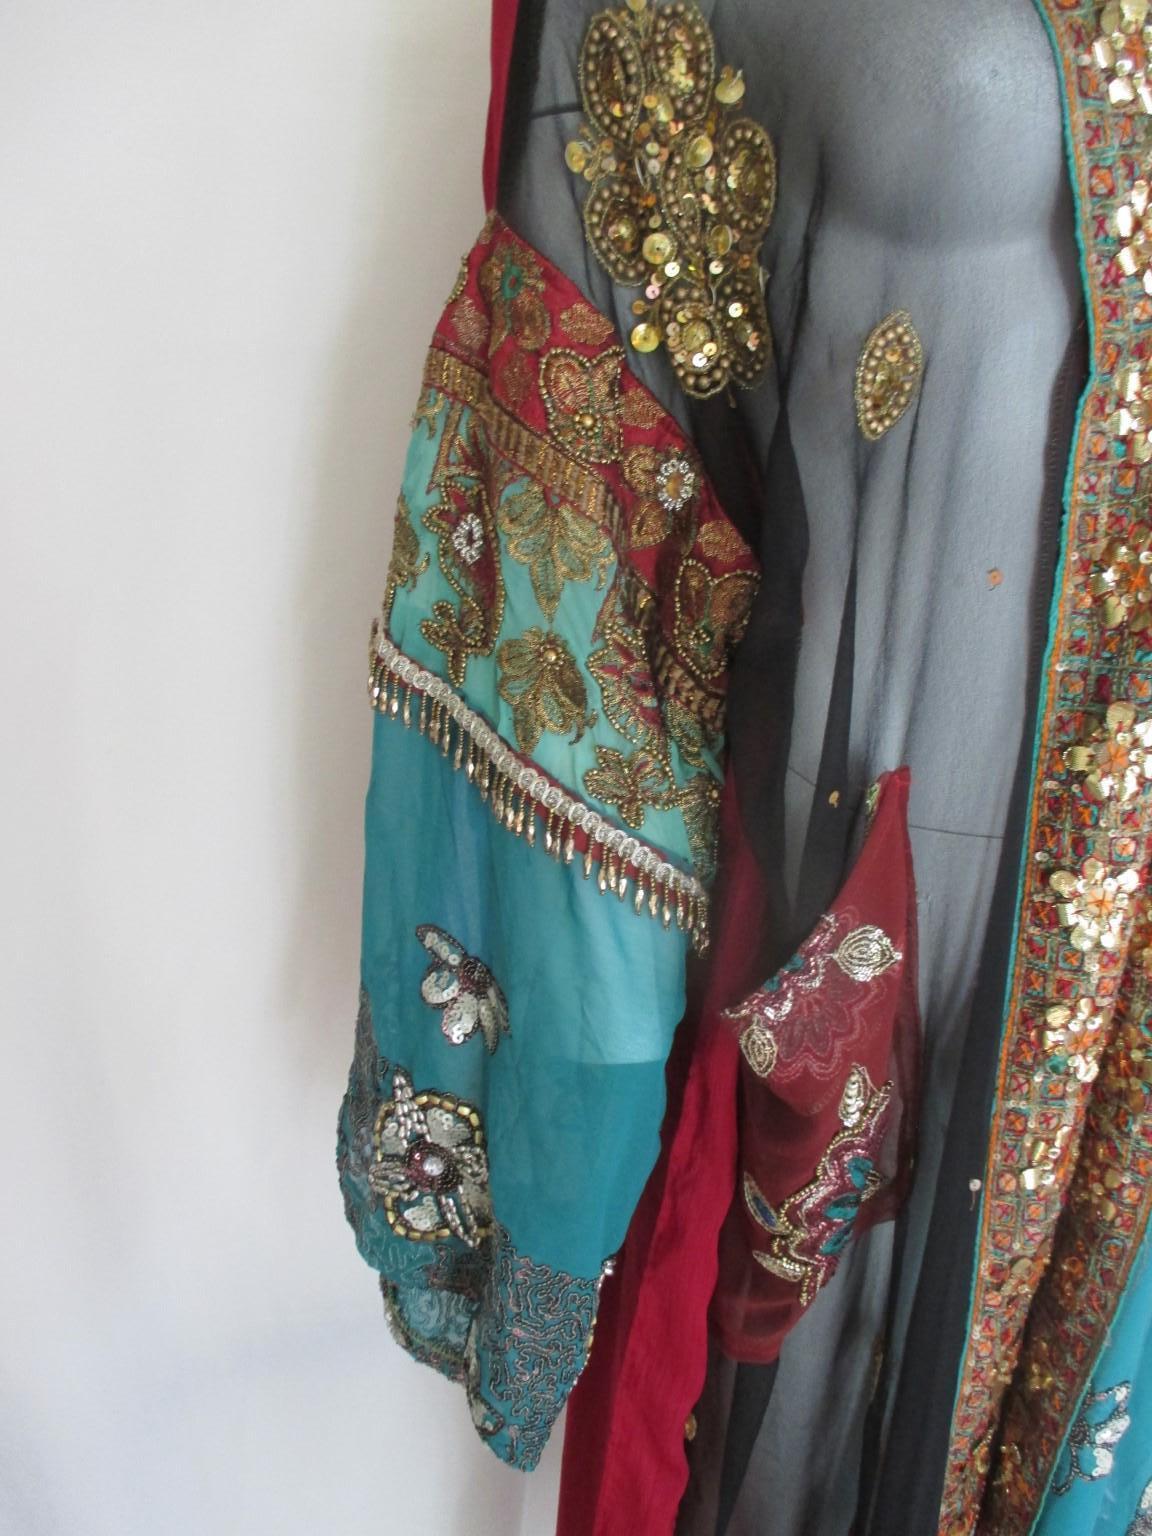 Hippy Style Gold Brocade Robe Coat In Good Condition For Sale In Amsterdam, NL